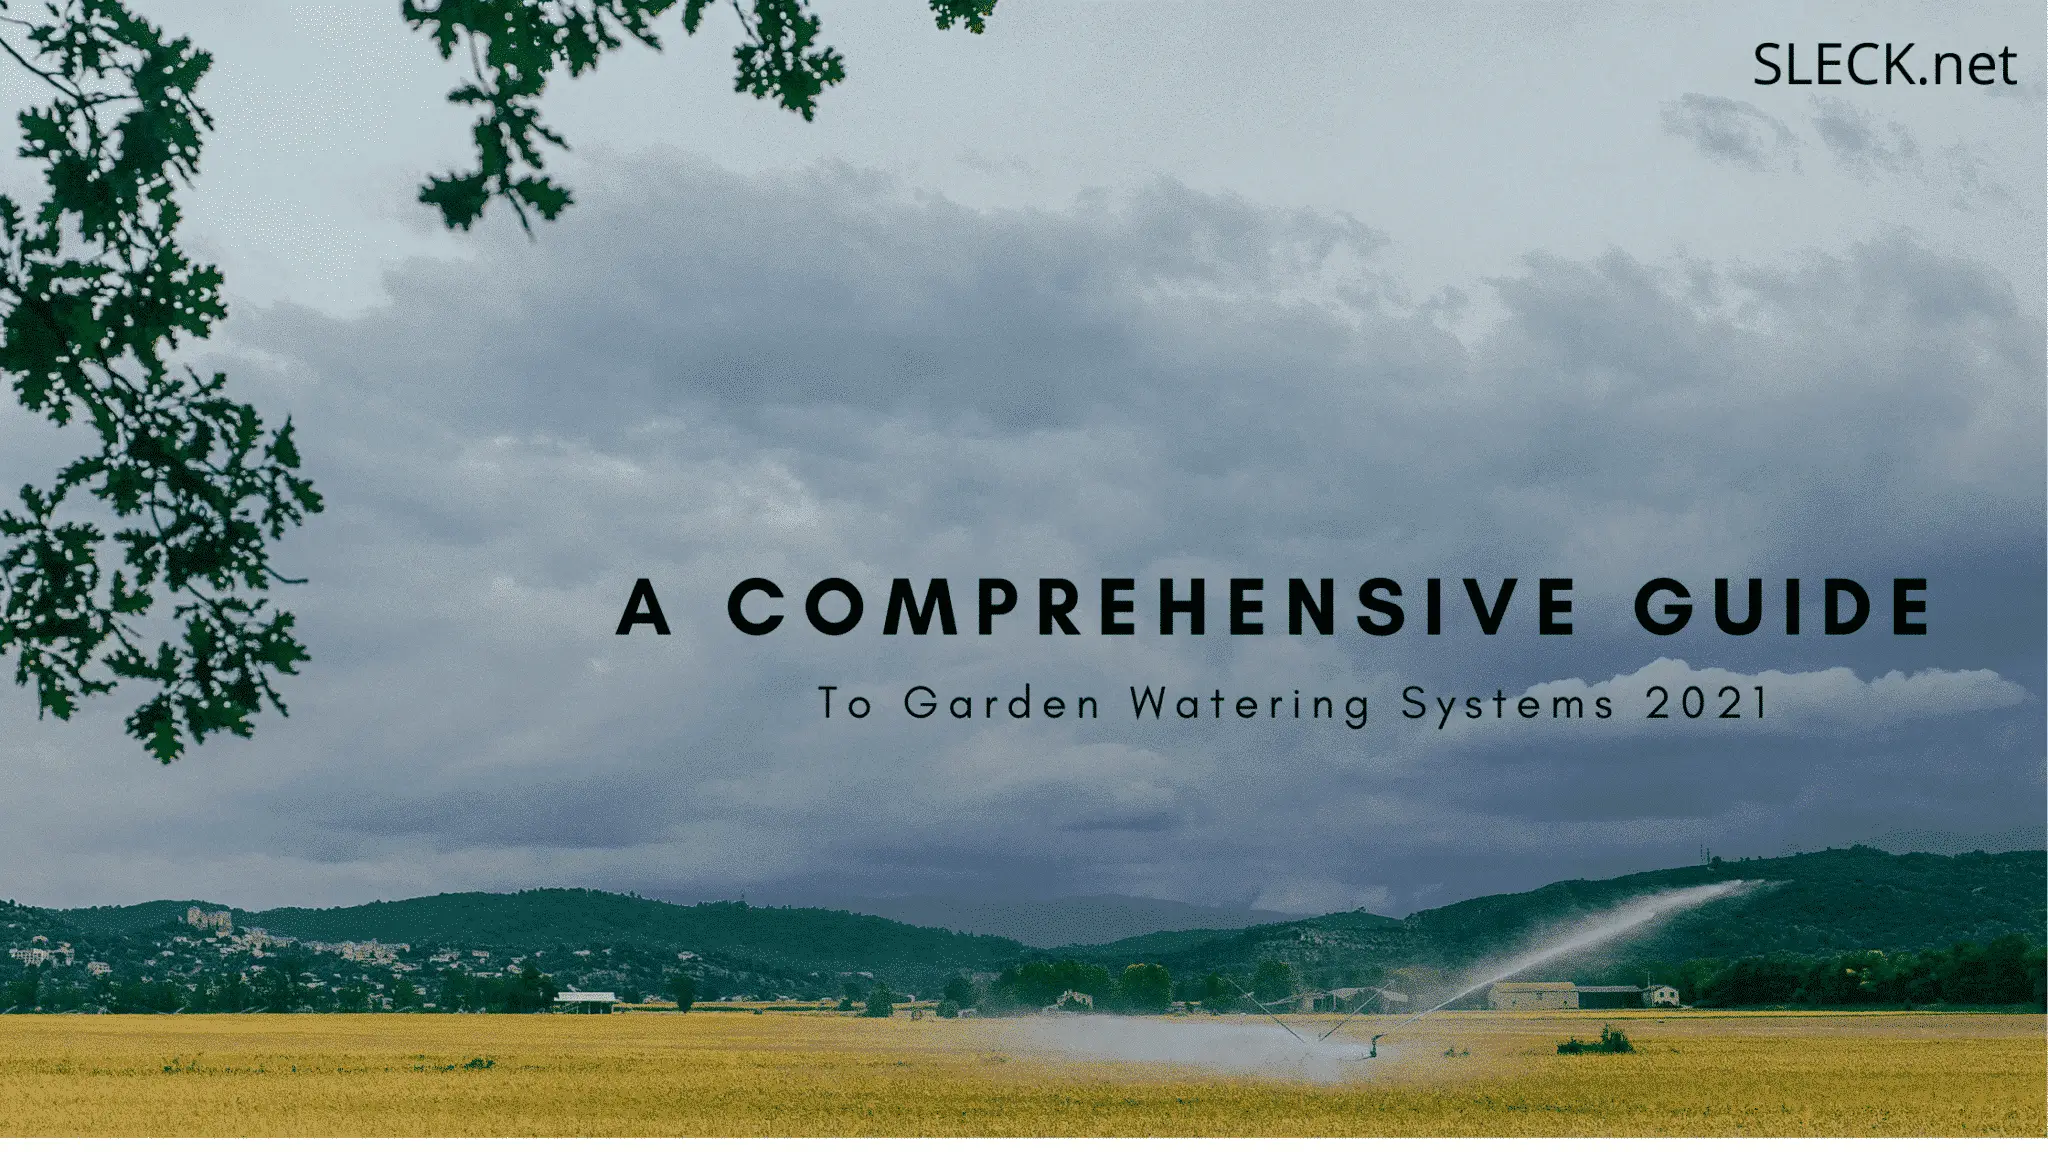 A Comprehensive Guide To Garden Watering Systems 2021